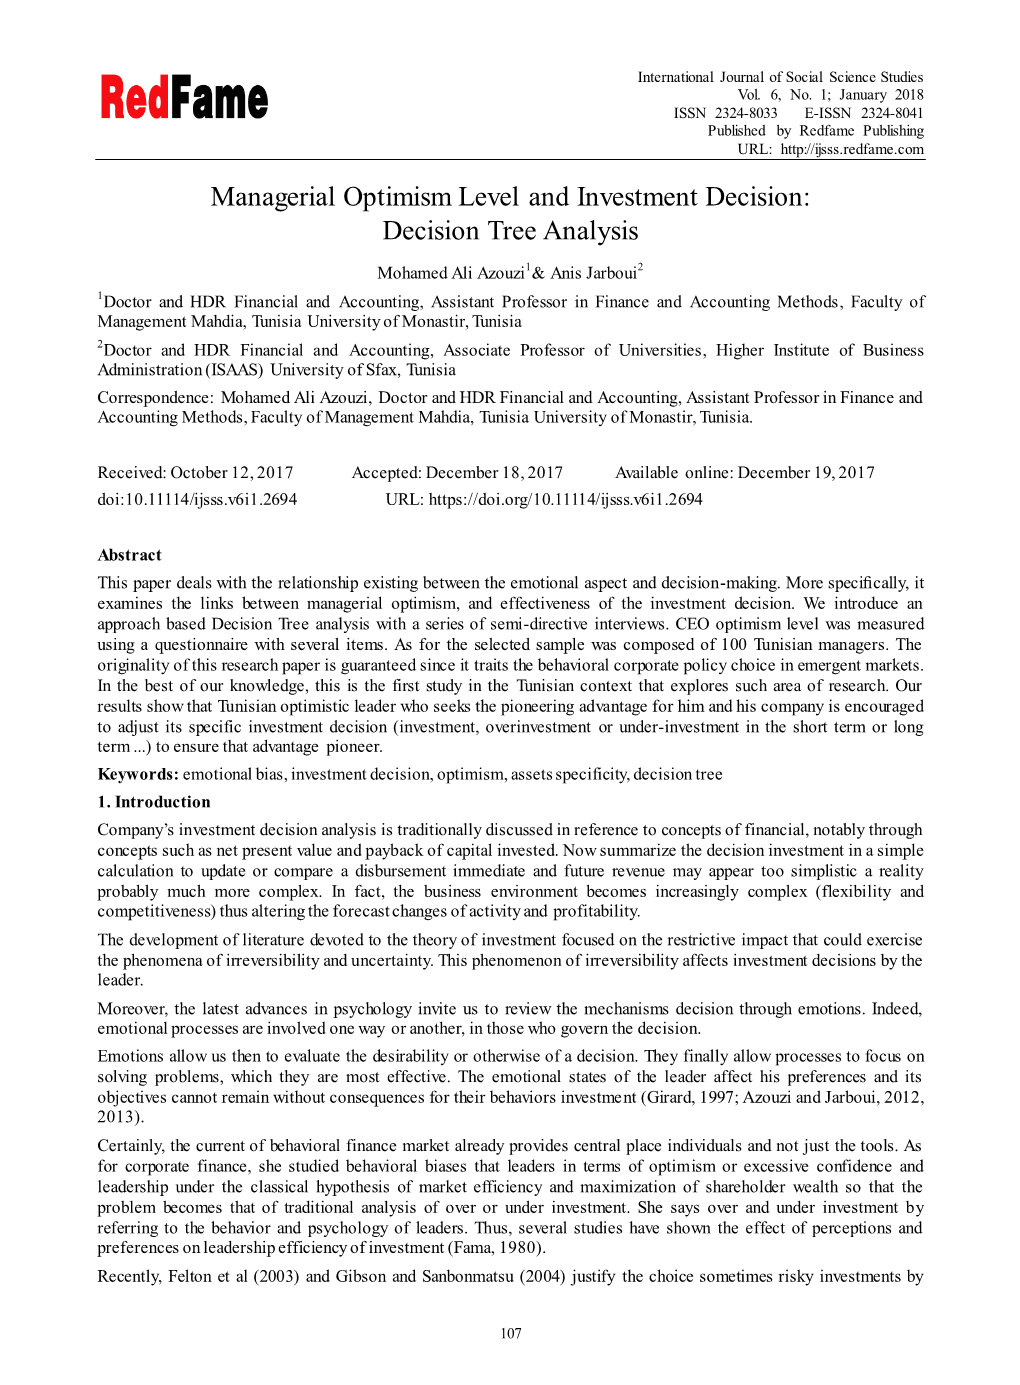 Managerial Optimism Level and Investment Decision: Decision Tree Analysis